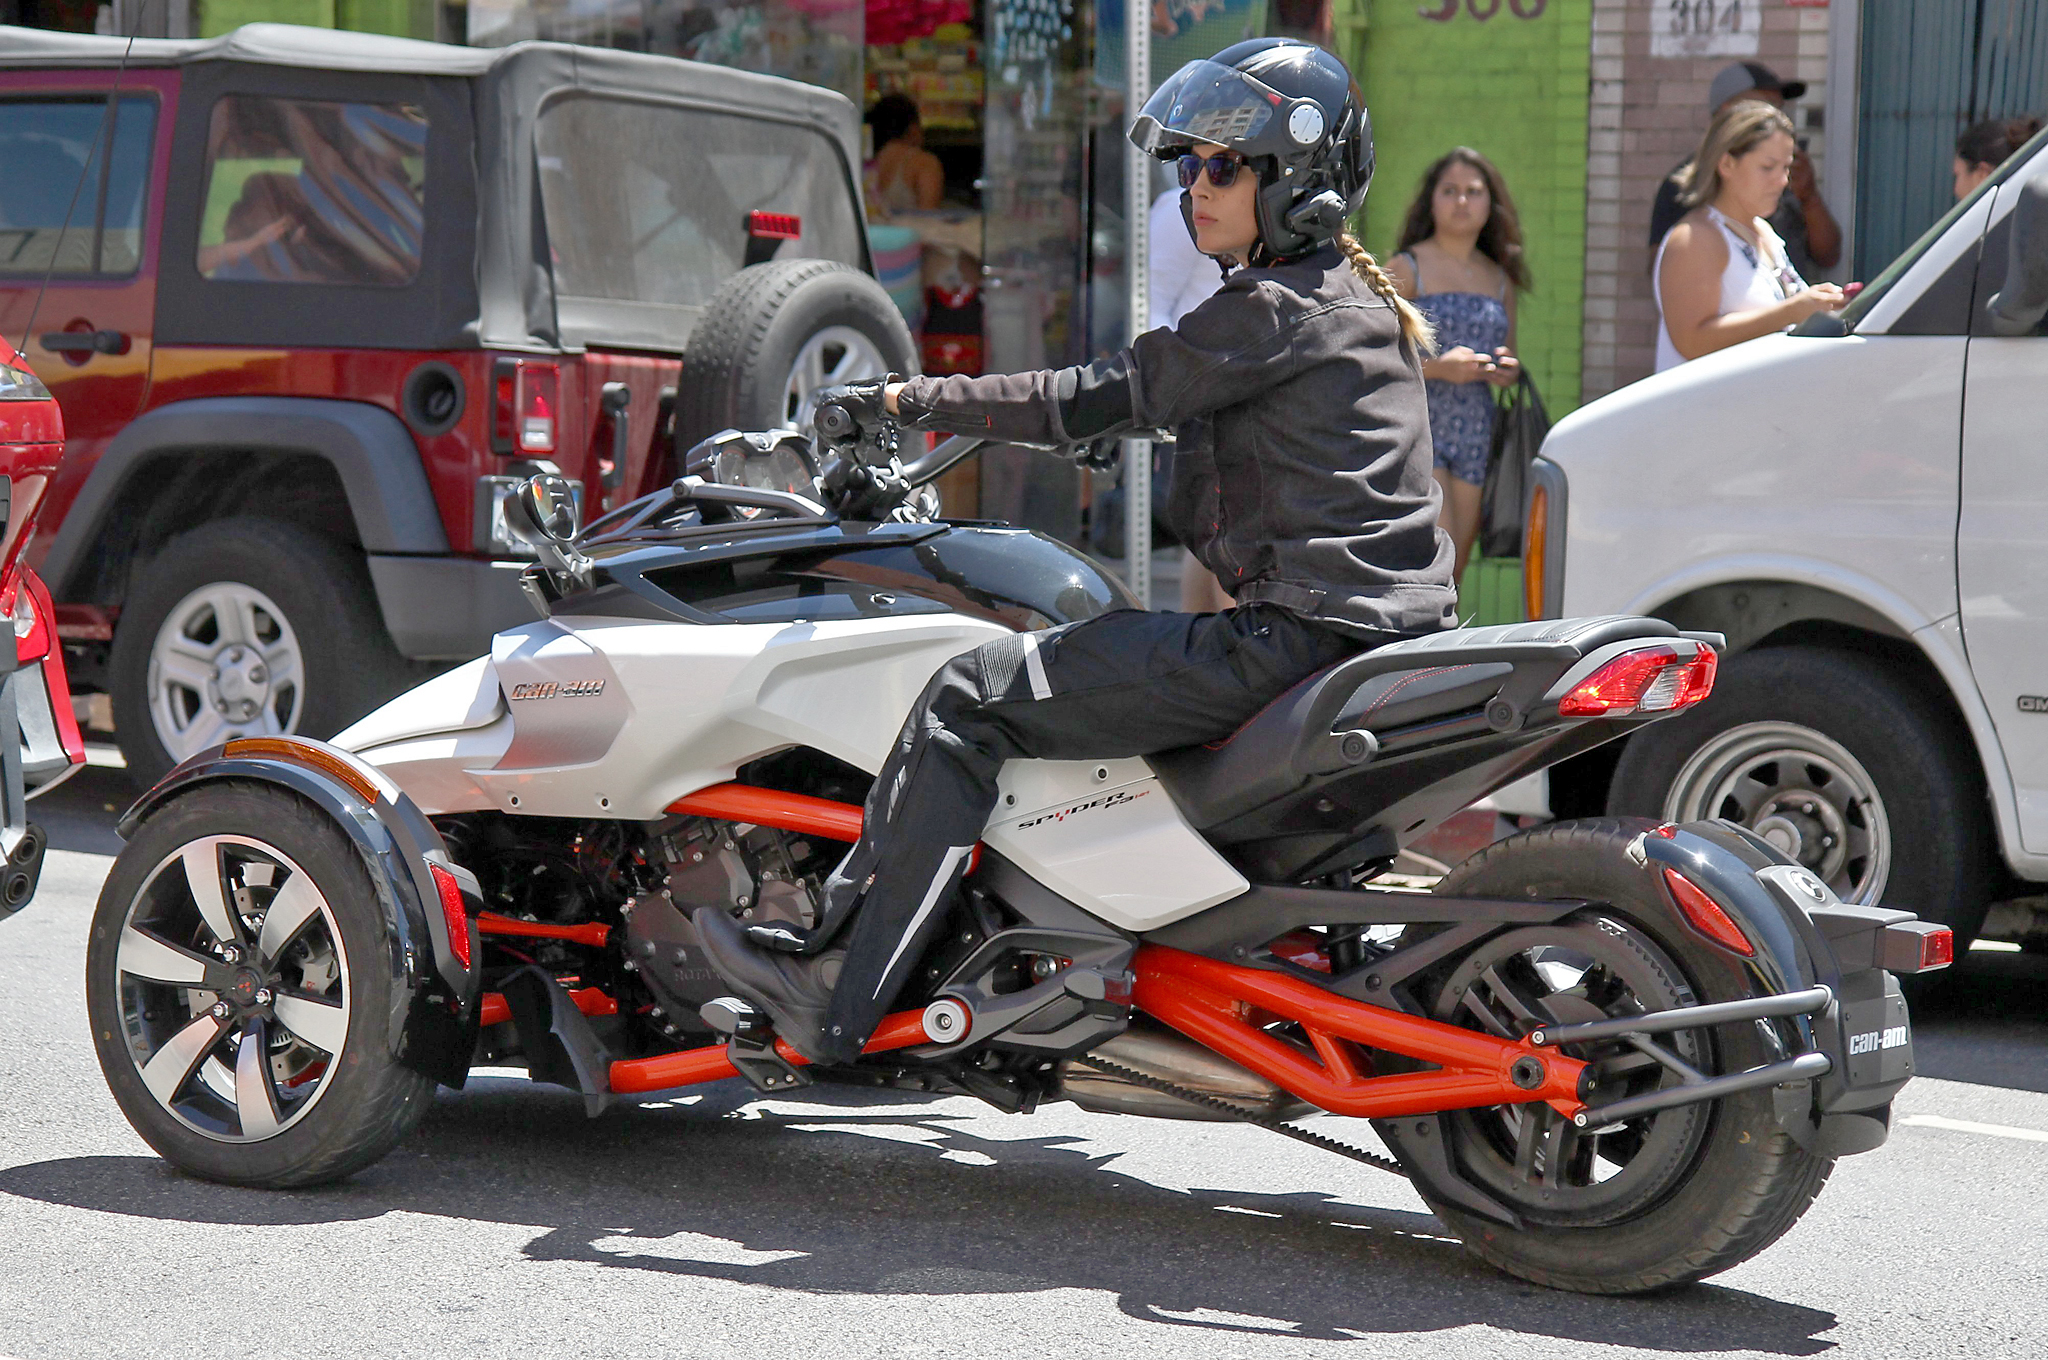 all-new-can-am-spyder-f3-efi-spotted-with-no-camouflage-photo-gallery_13.jpg